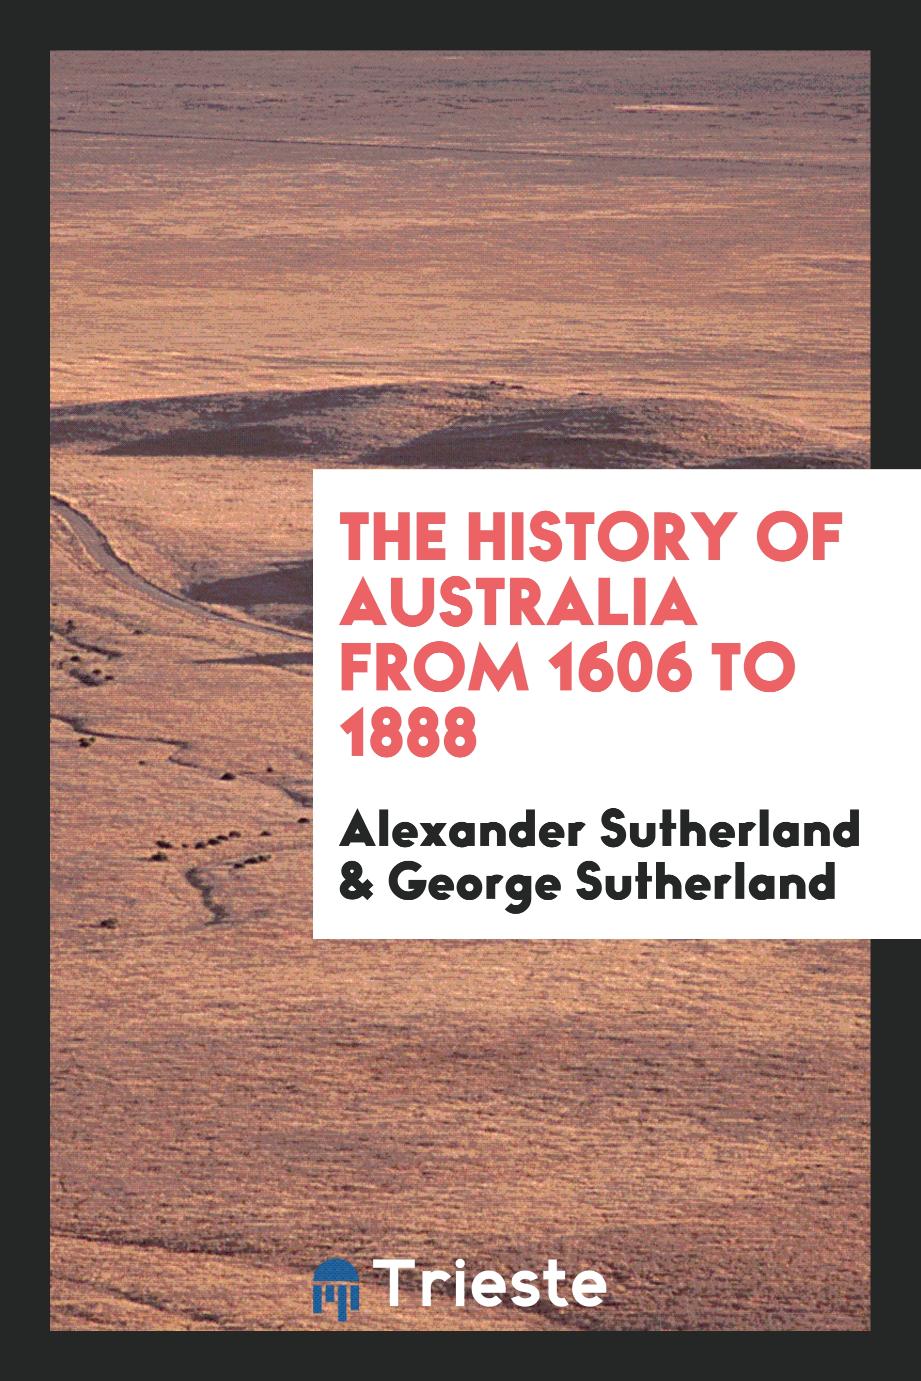 The history of Australia from 1606 to 1888